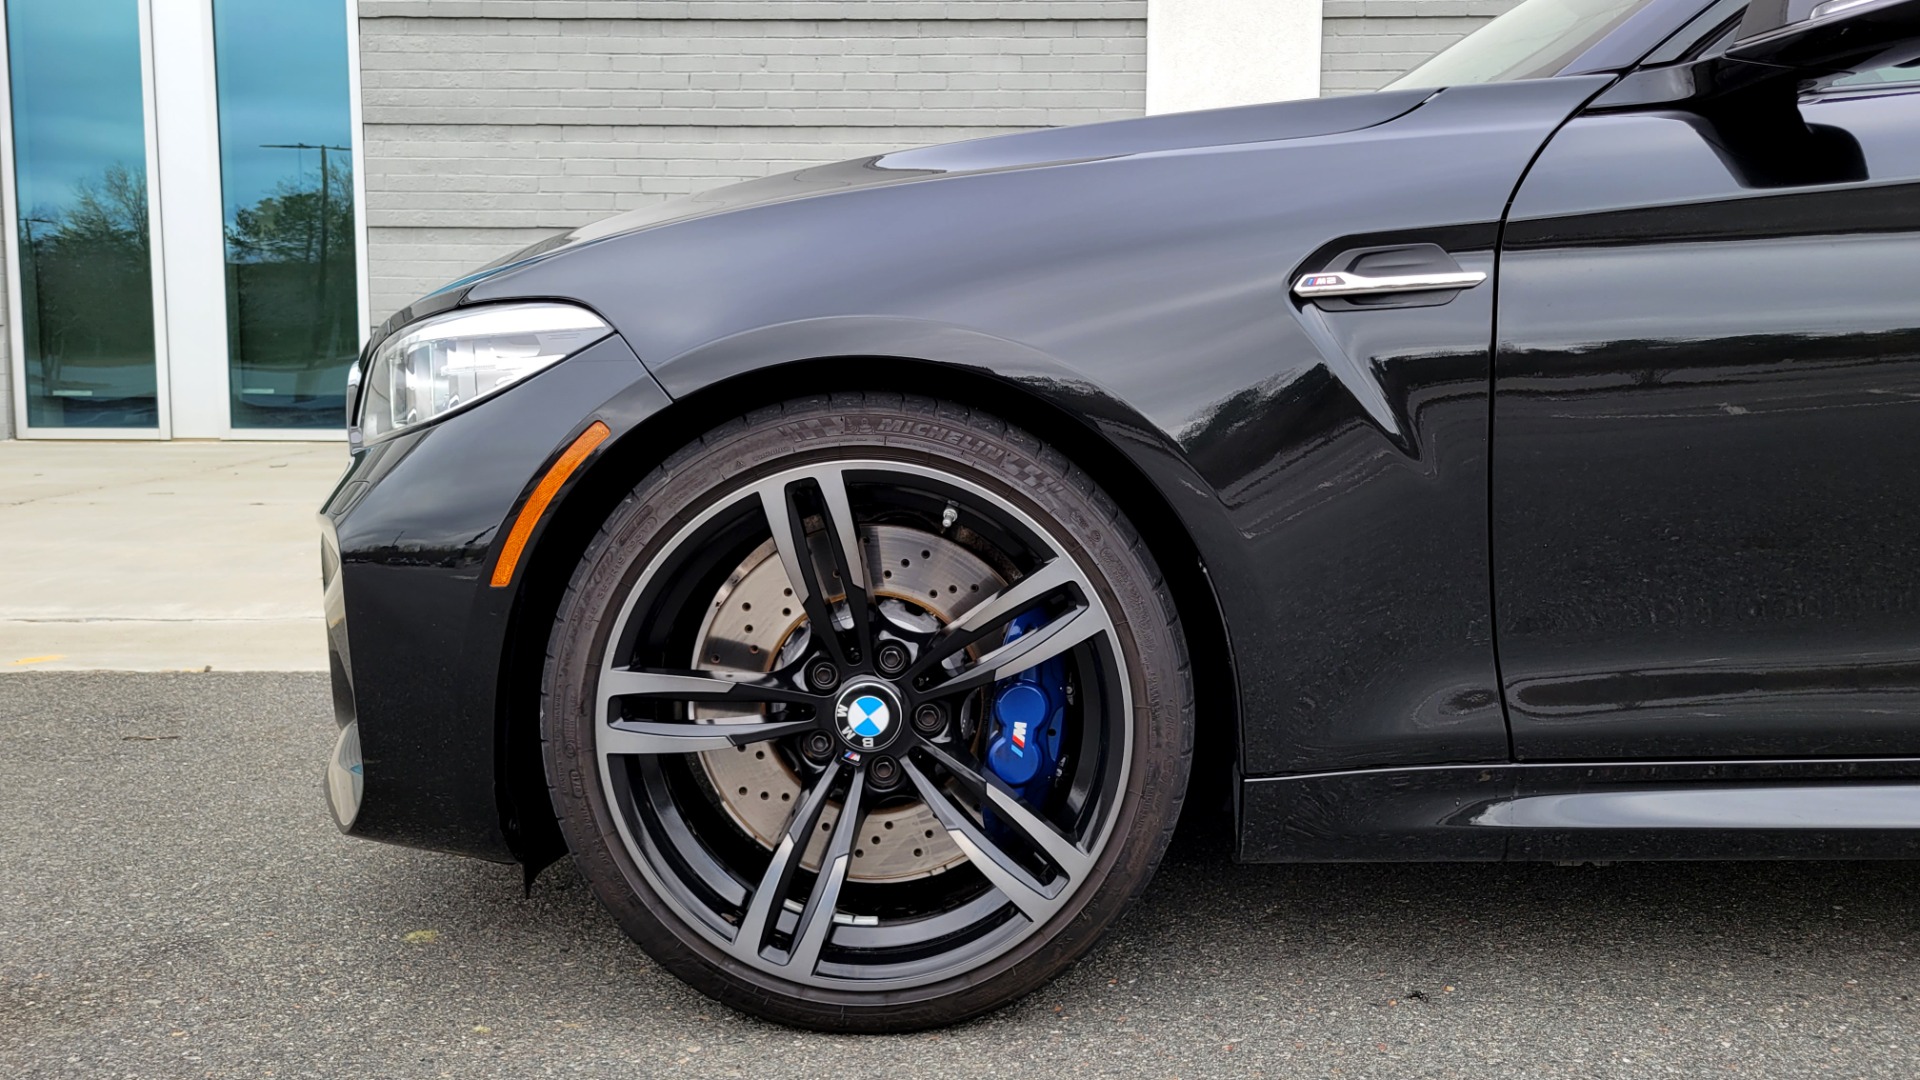 Used 2018 BMW M2 COUPE W/EXECUTIVE PKG / WIFI / H/K SND / PARK ASST / REARVIEW for sale Sold at Formula Imports in Charlotte NC 28227 76